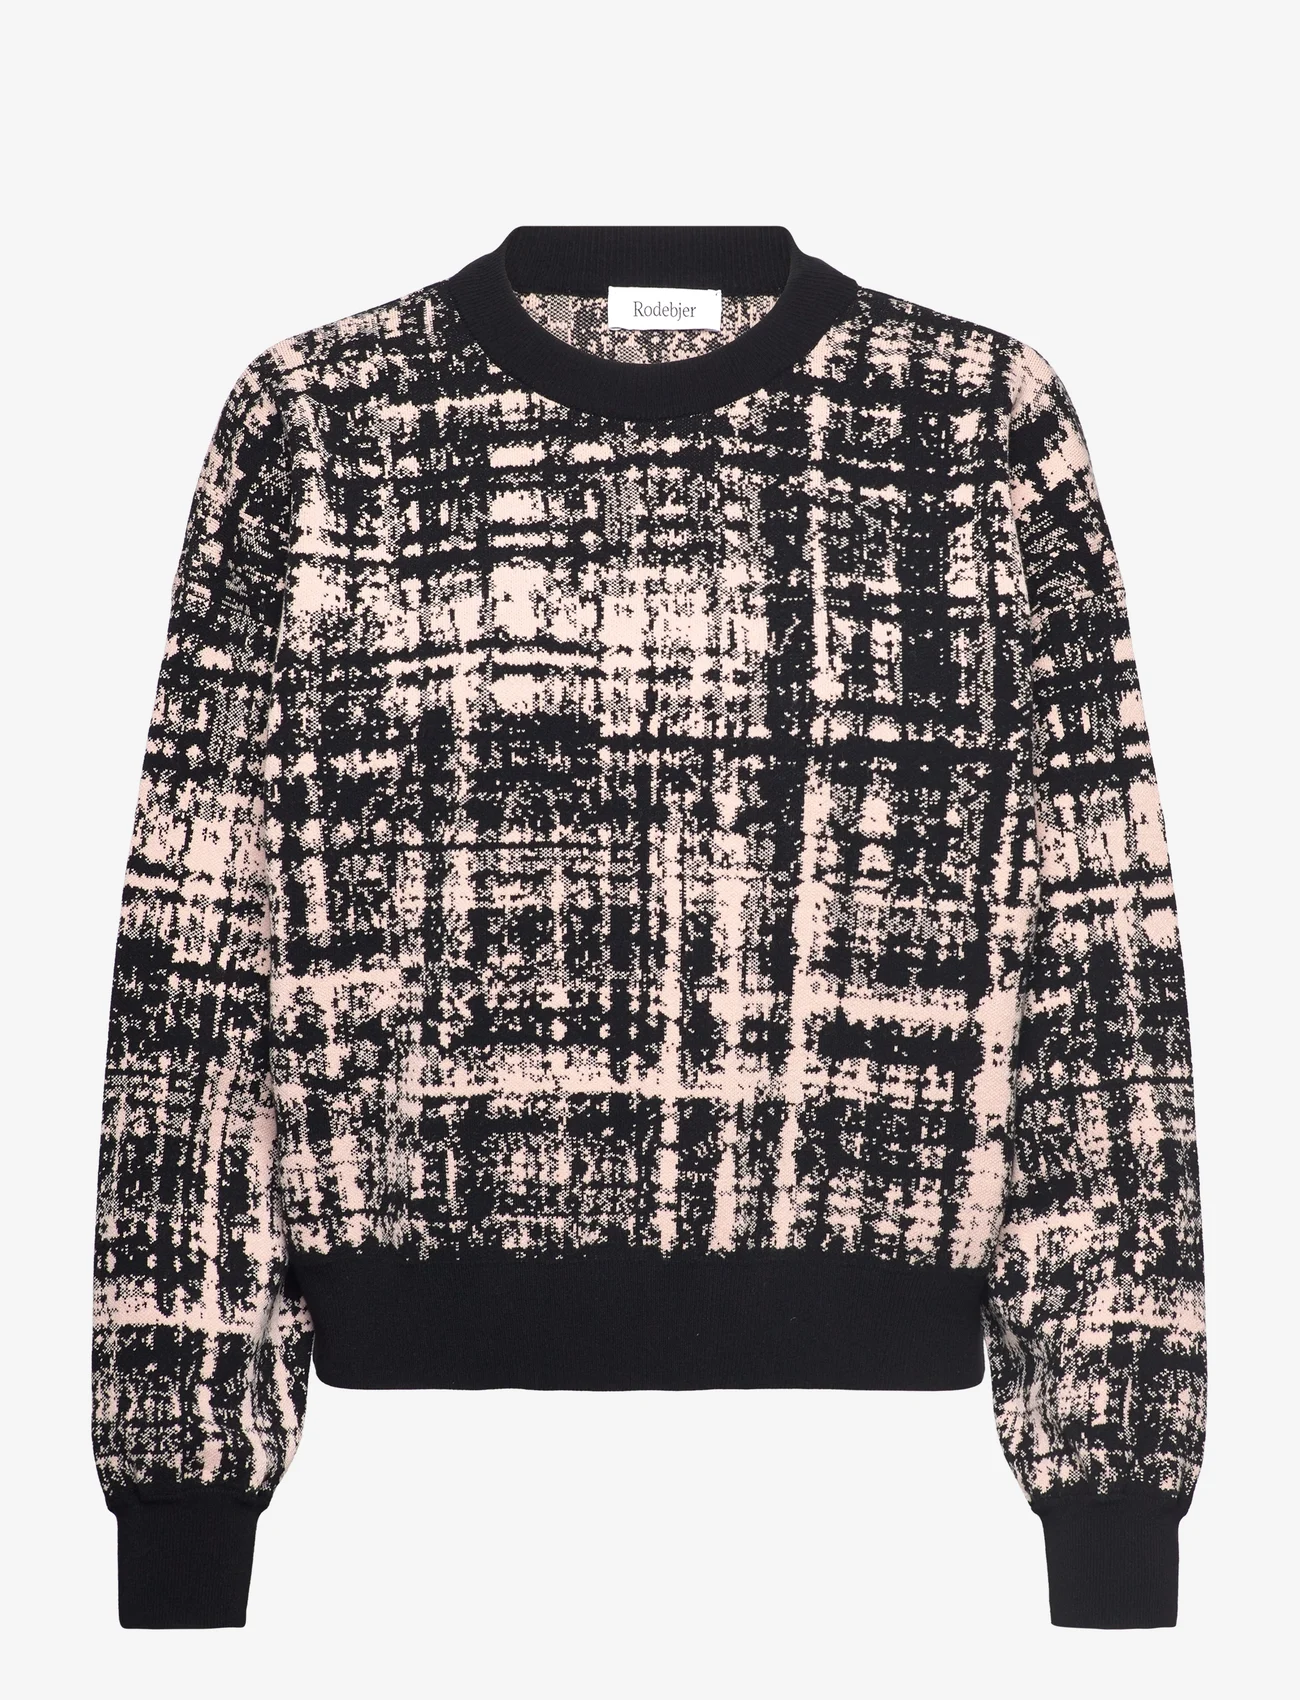 RODEBJER - Rodebjer Fiore Check - jumpers - blush - 0